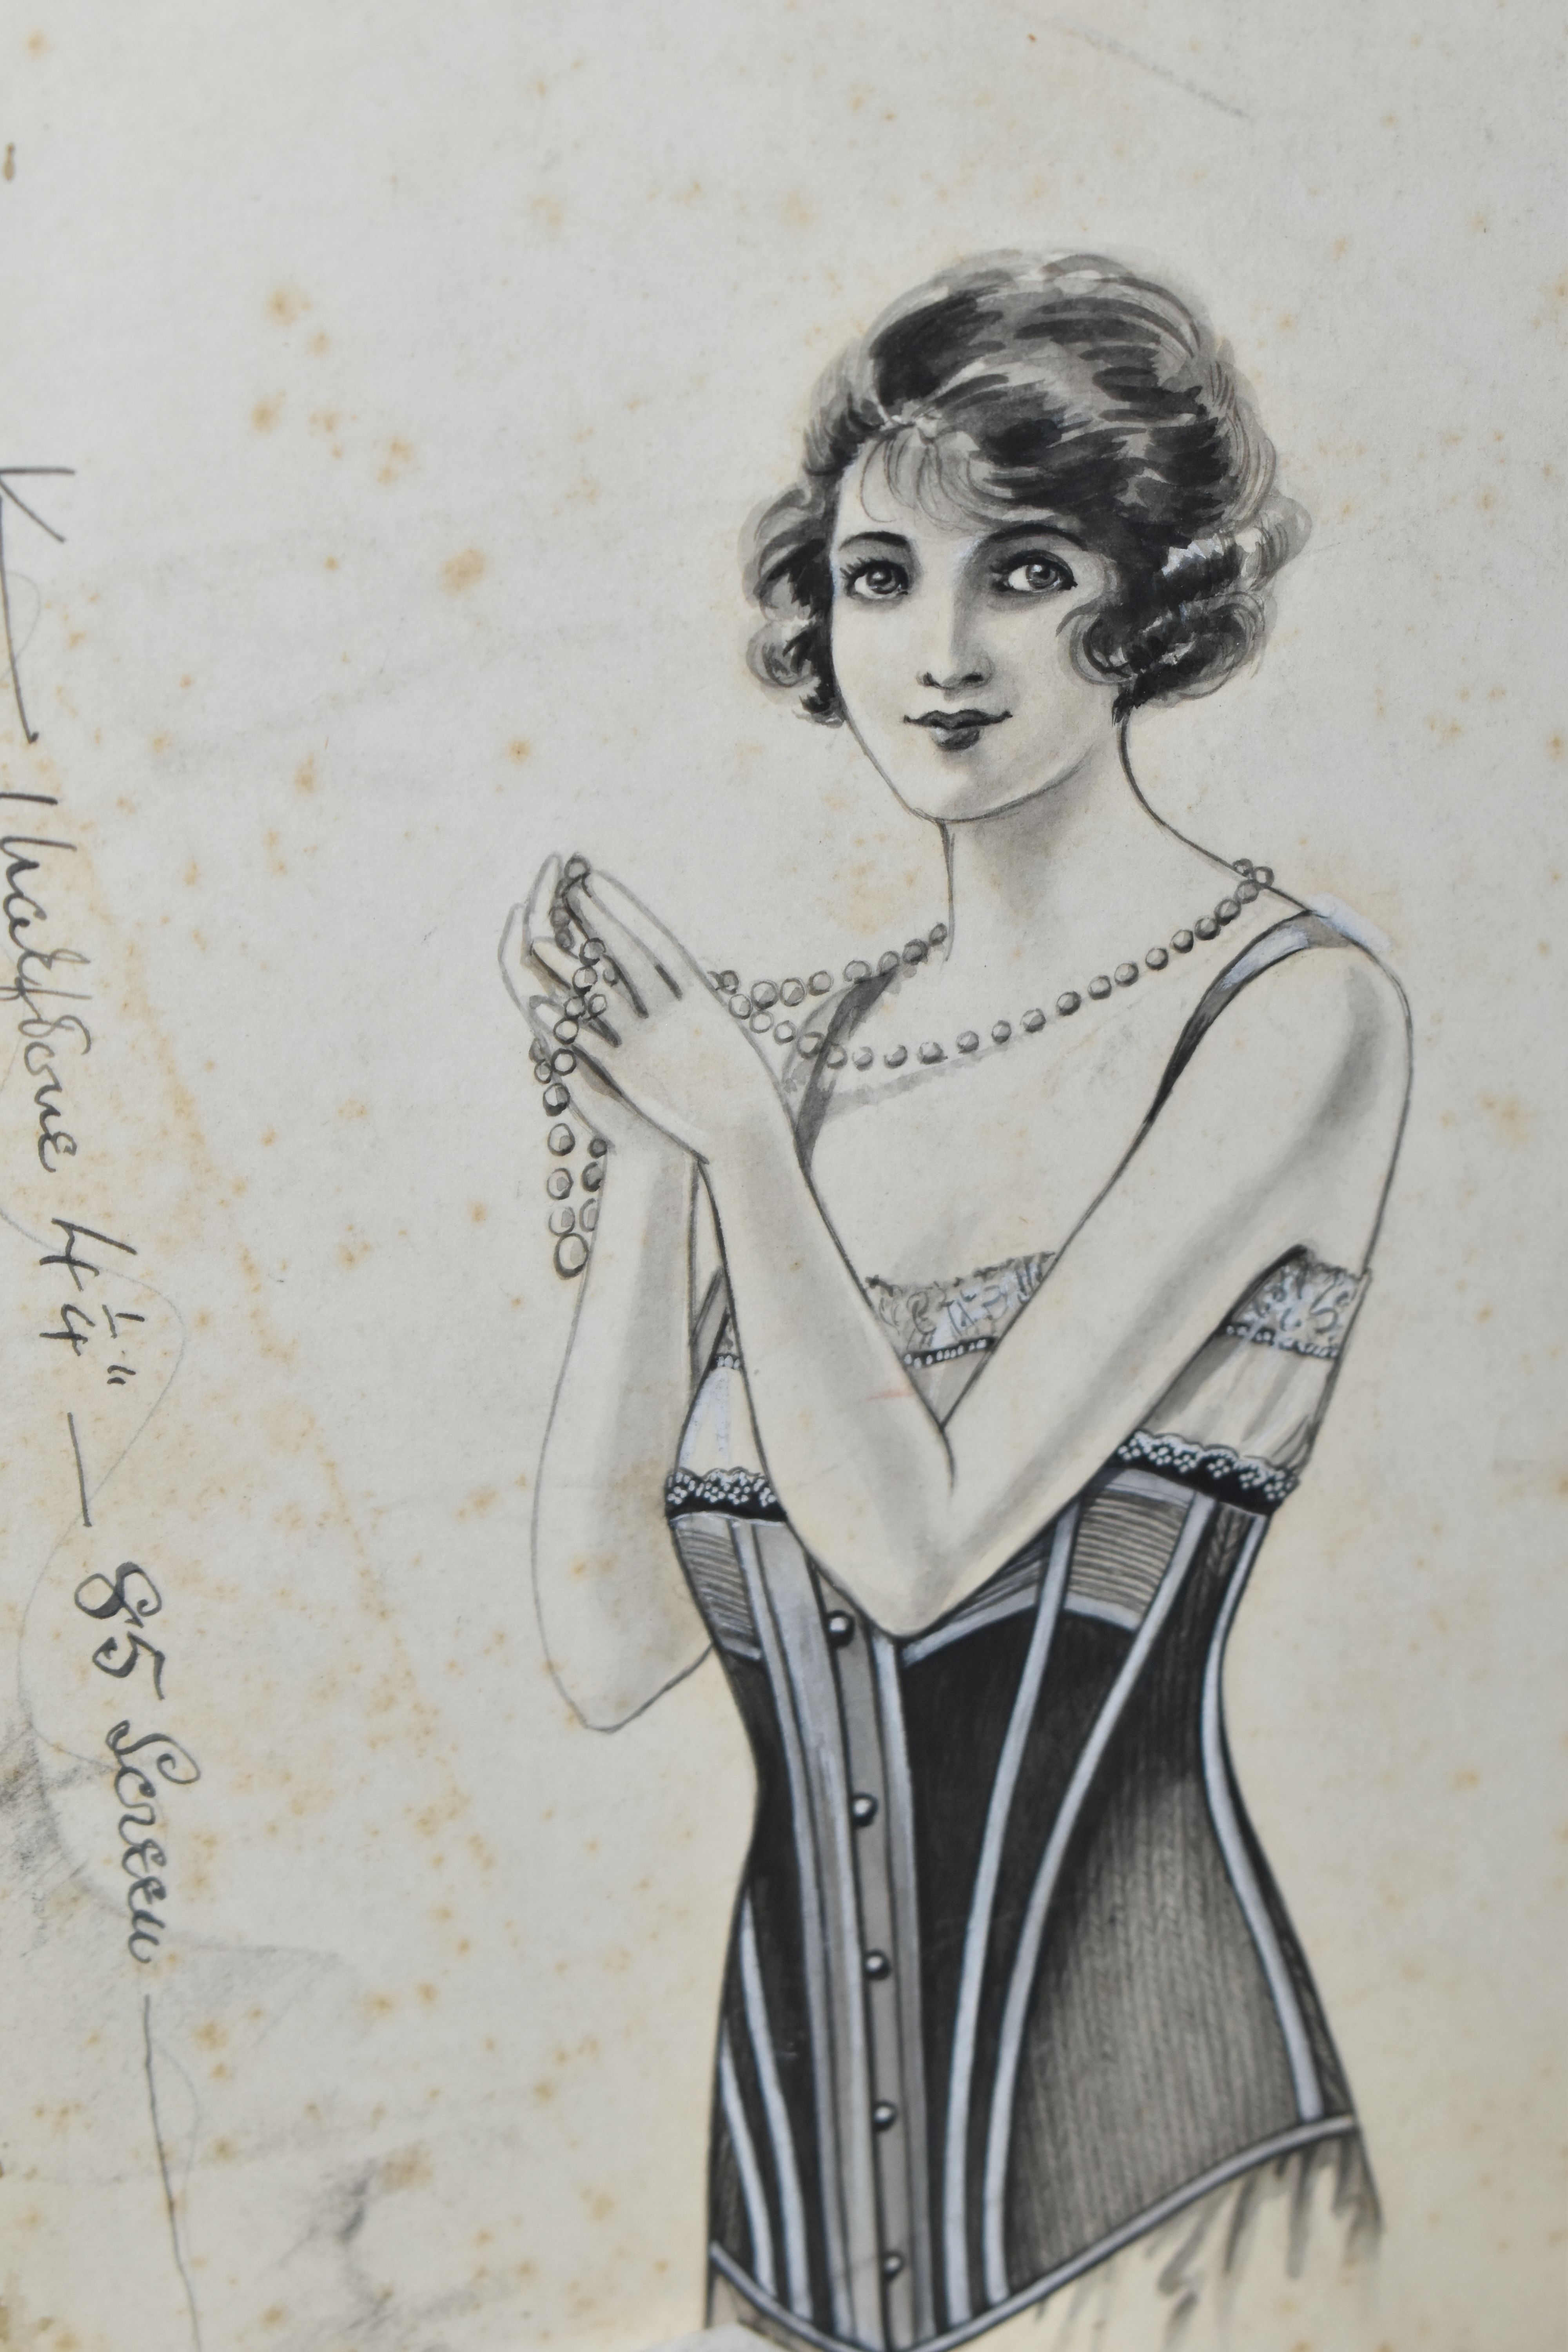 A COLLECTION OF 19TH, 20TH AND EARLY 21ST CENTURY CORSETS, HISTORICAL DOCUMENTS, ADVERTISEMENTS, - Image 5 of 36